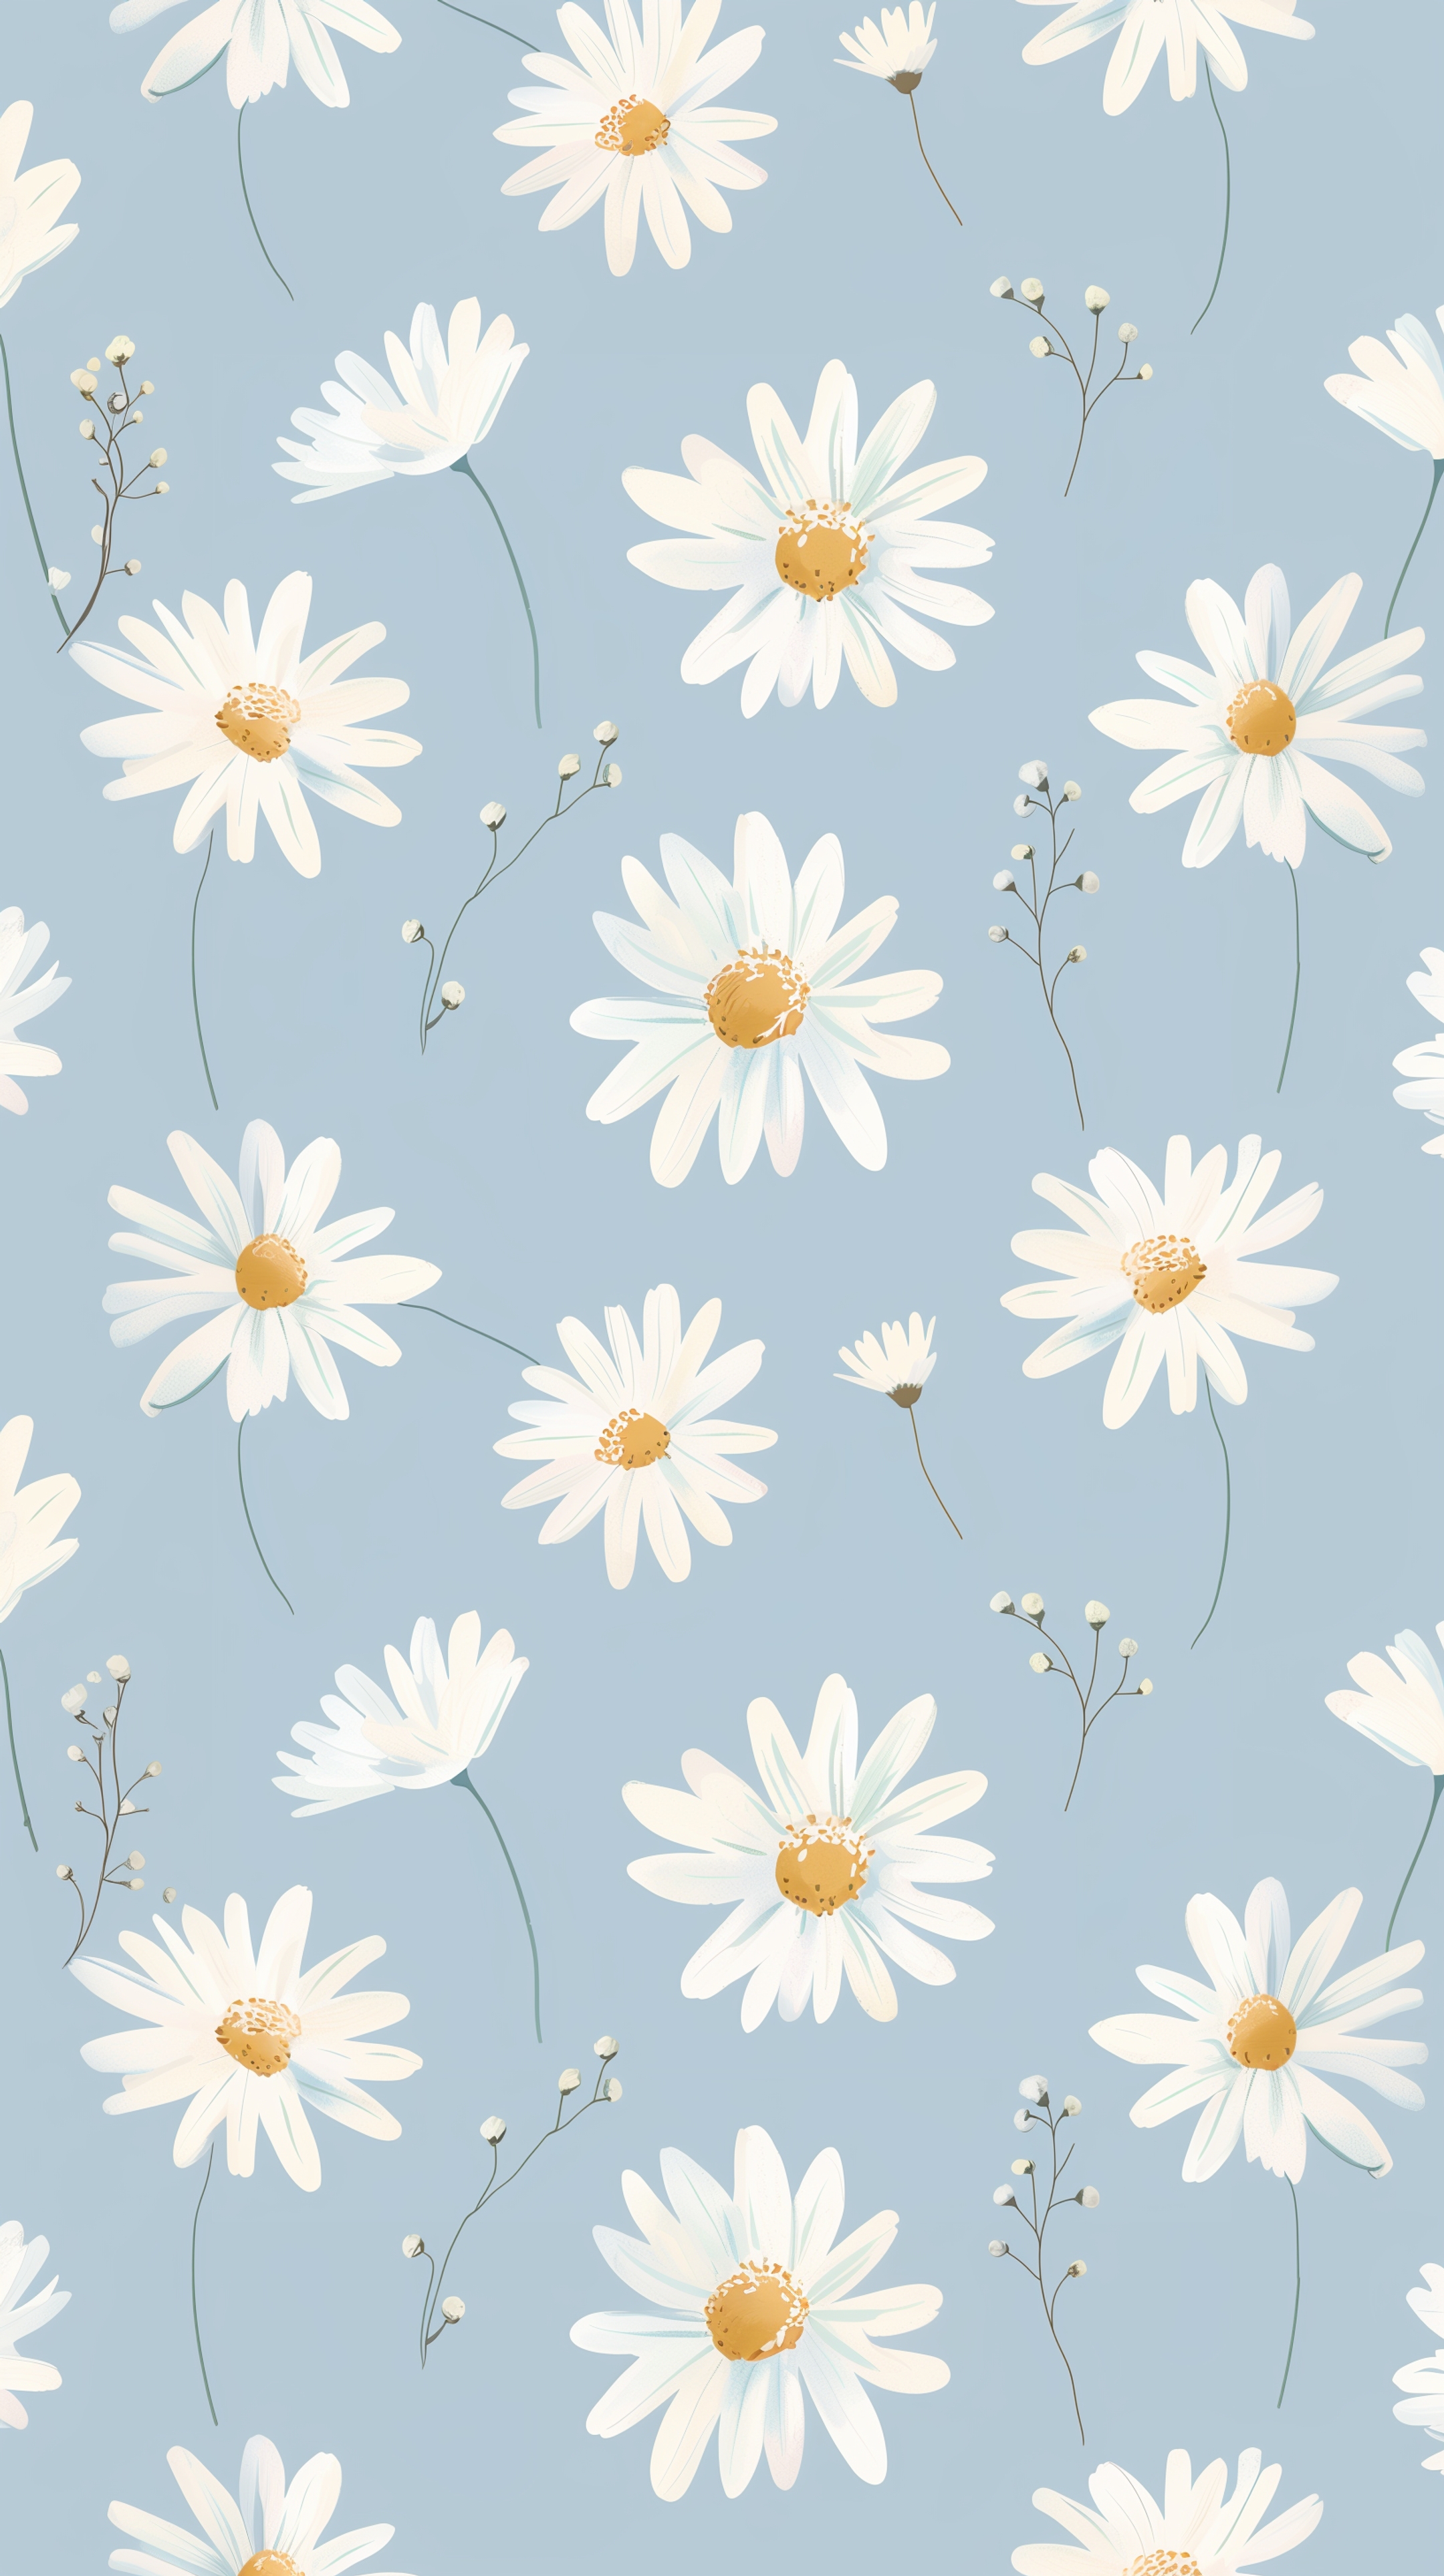 Daisies on Blue Sky Background Tapet[1e98836dbca641958783]